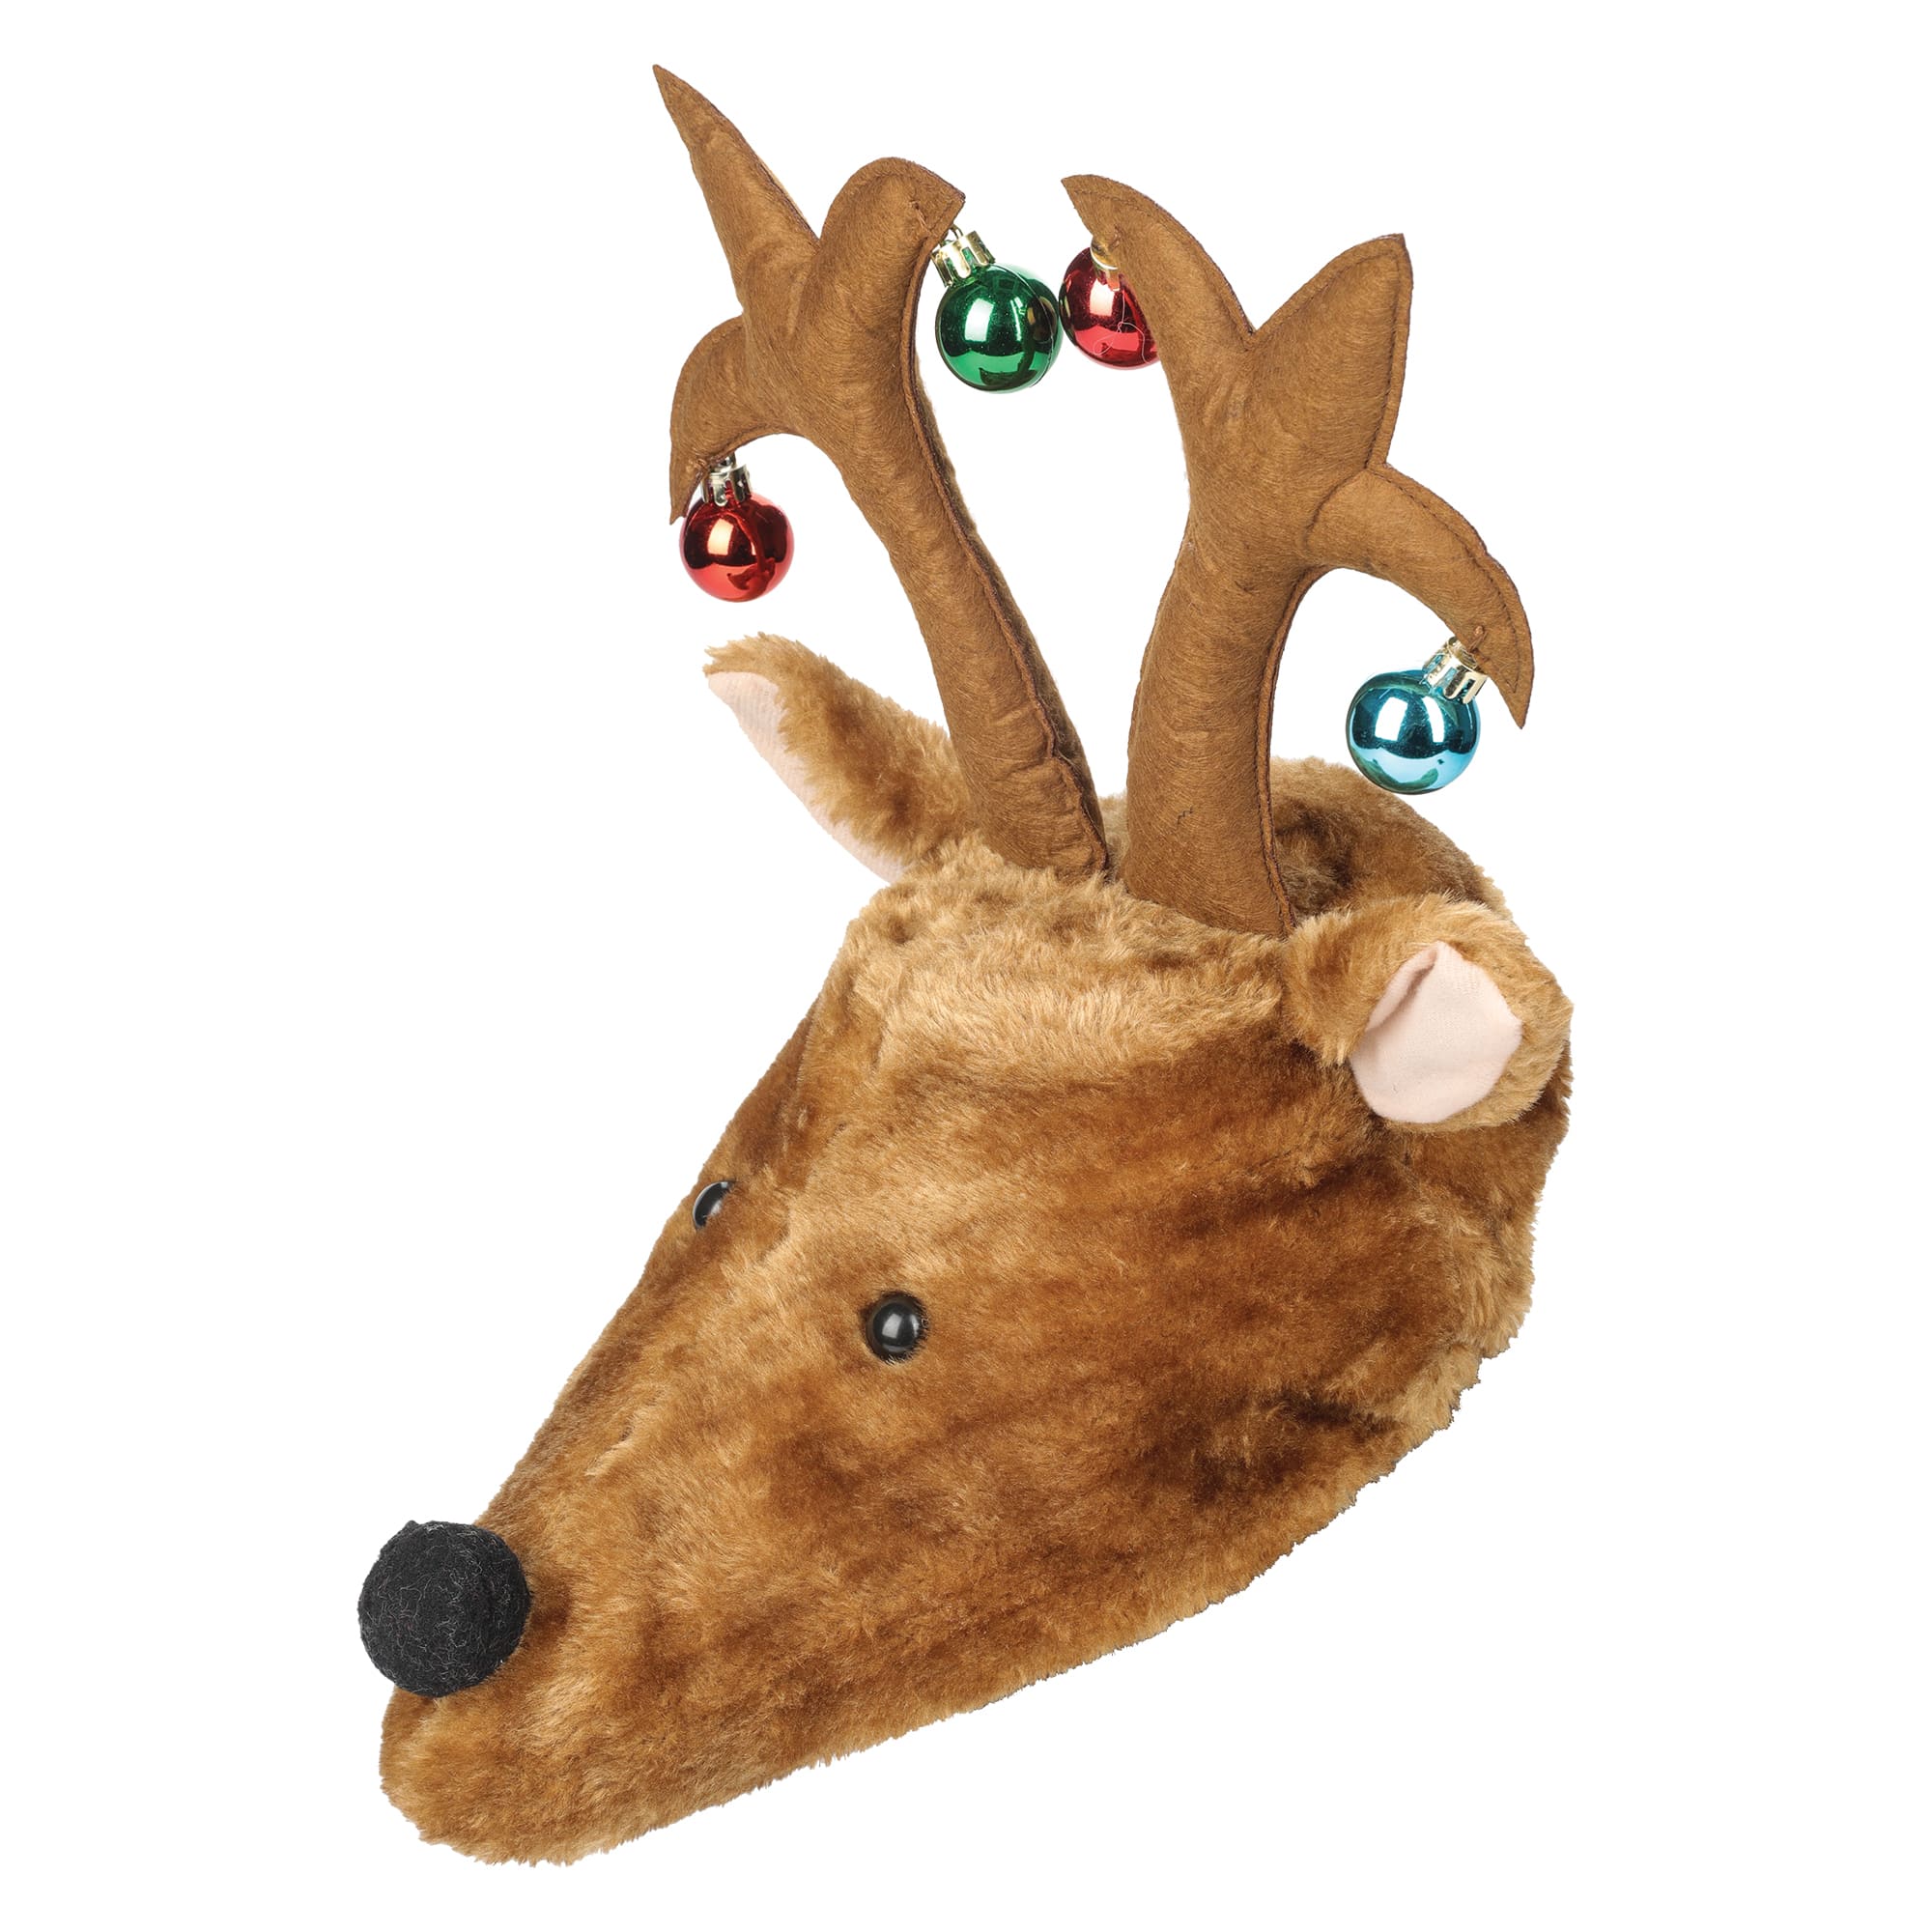 ThisWear Christmas Accessories Winter Holiday Reindeer Theme 6-Pack Trucker  Hats